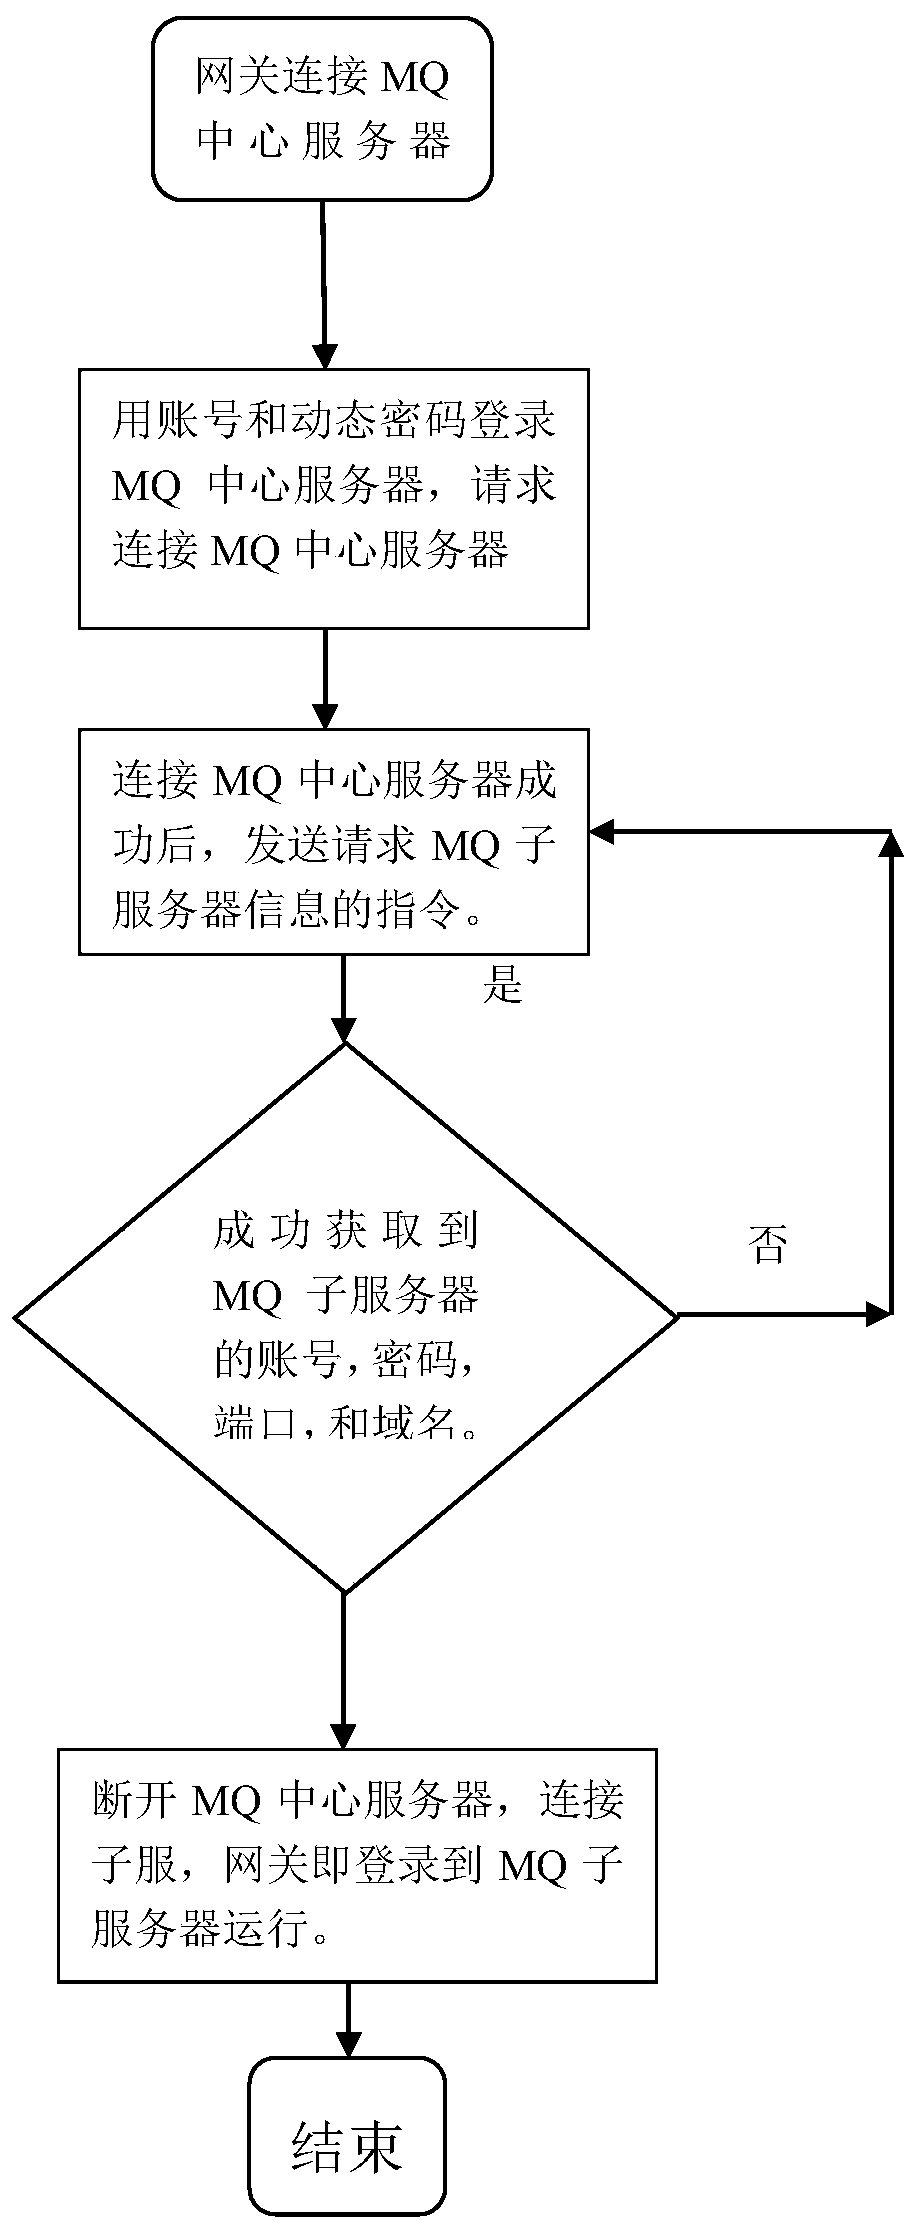 Dynamic theme and stable operation processing method of gateway based on MQTT protocol